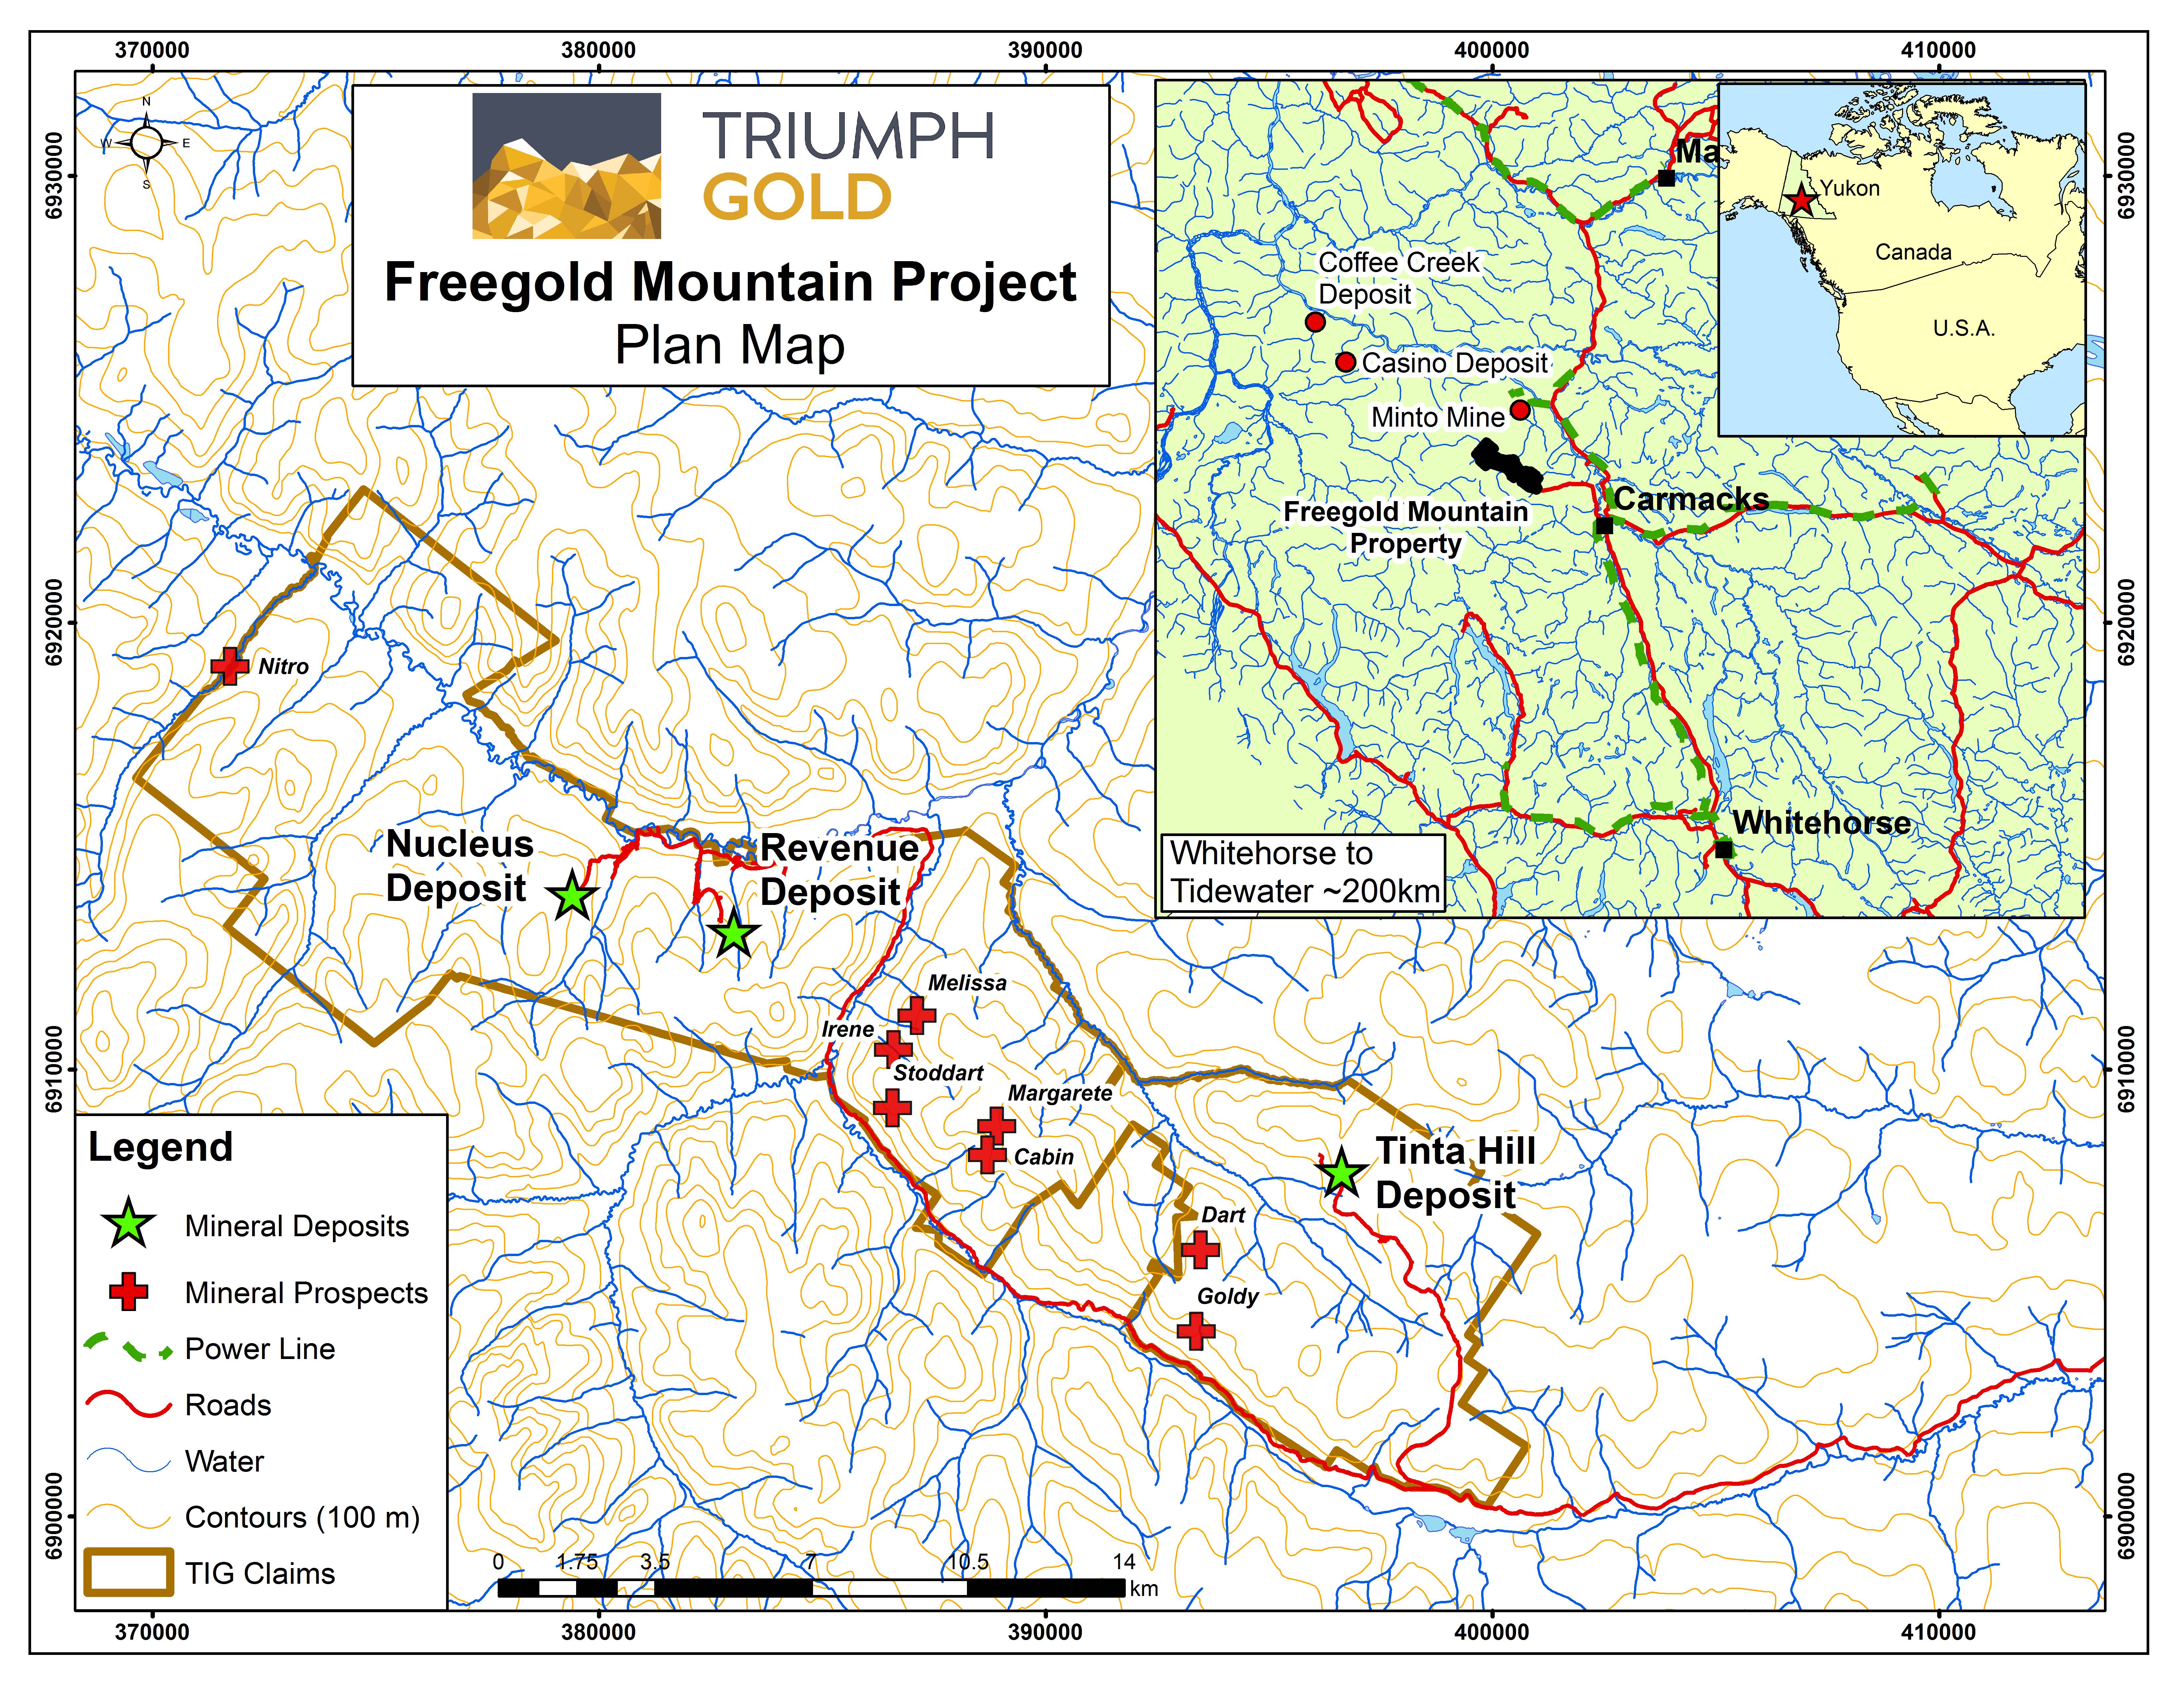 Triumph Gold - Freegold Mountain Project Plan Map